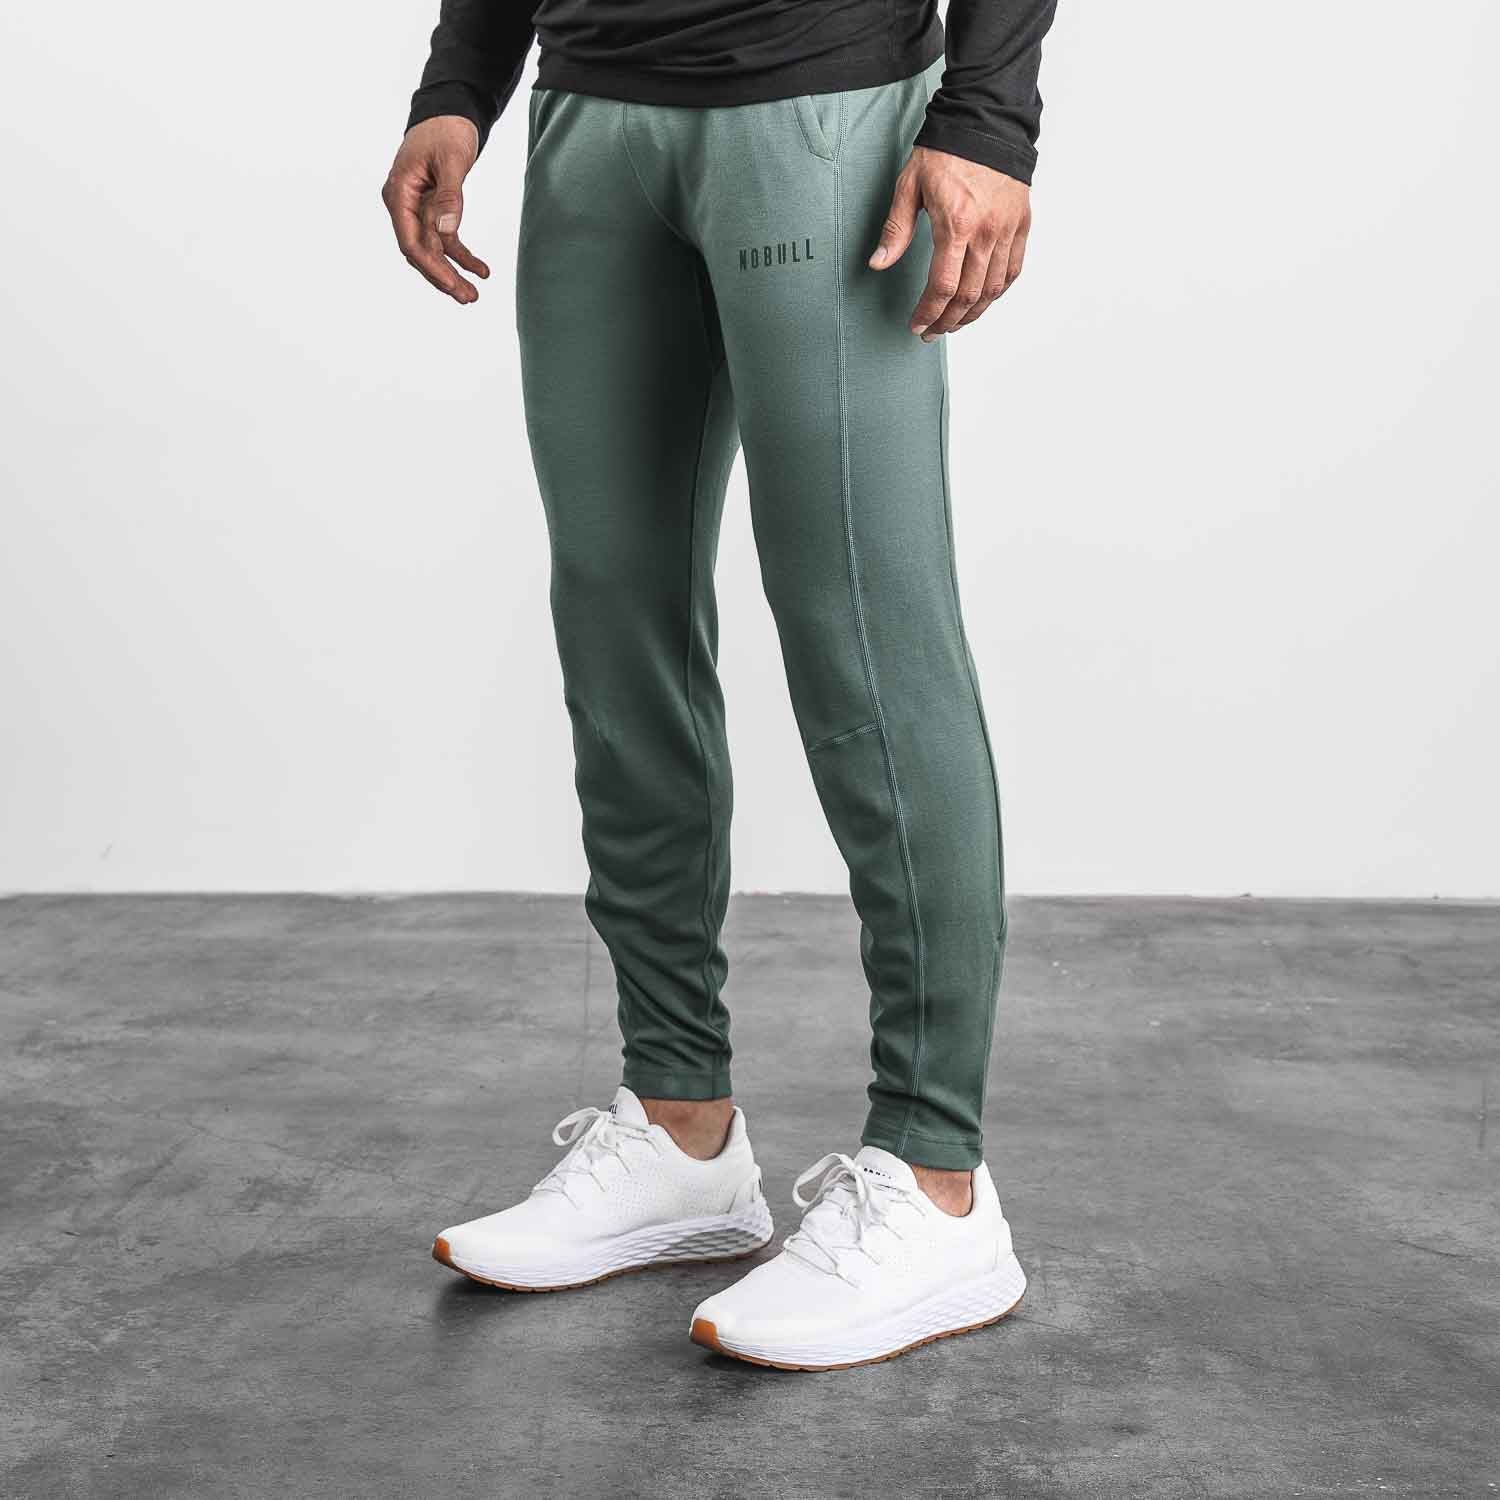  All in Motion Men's Textured Knit Fleece Lined Jogger